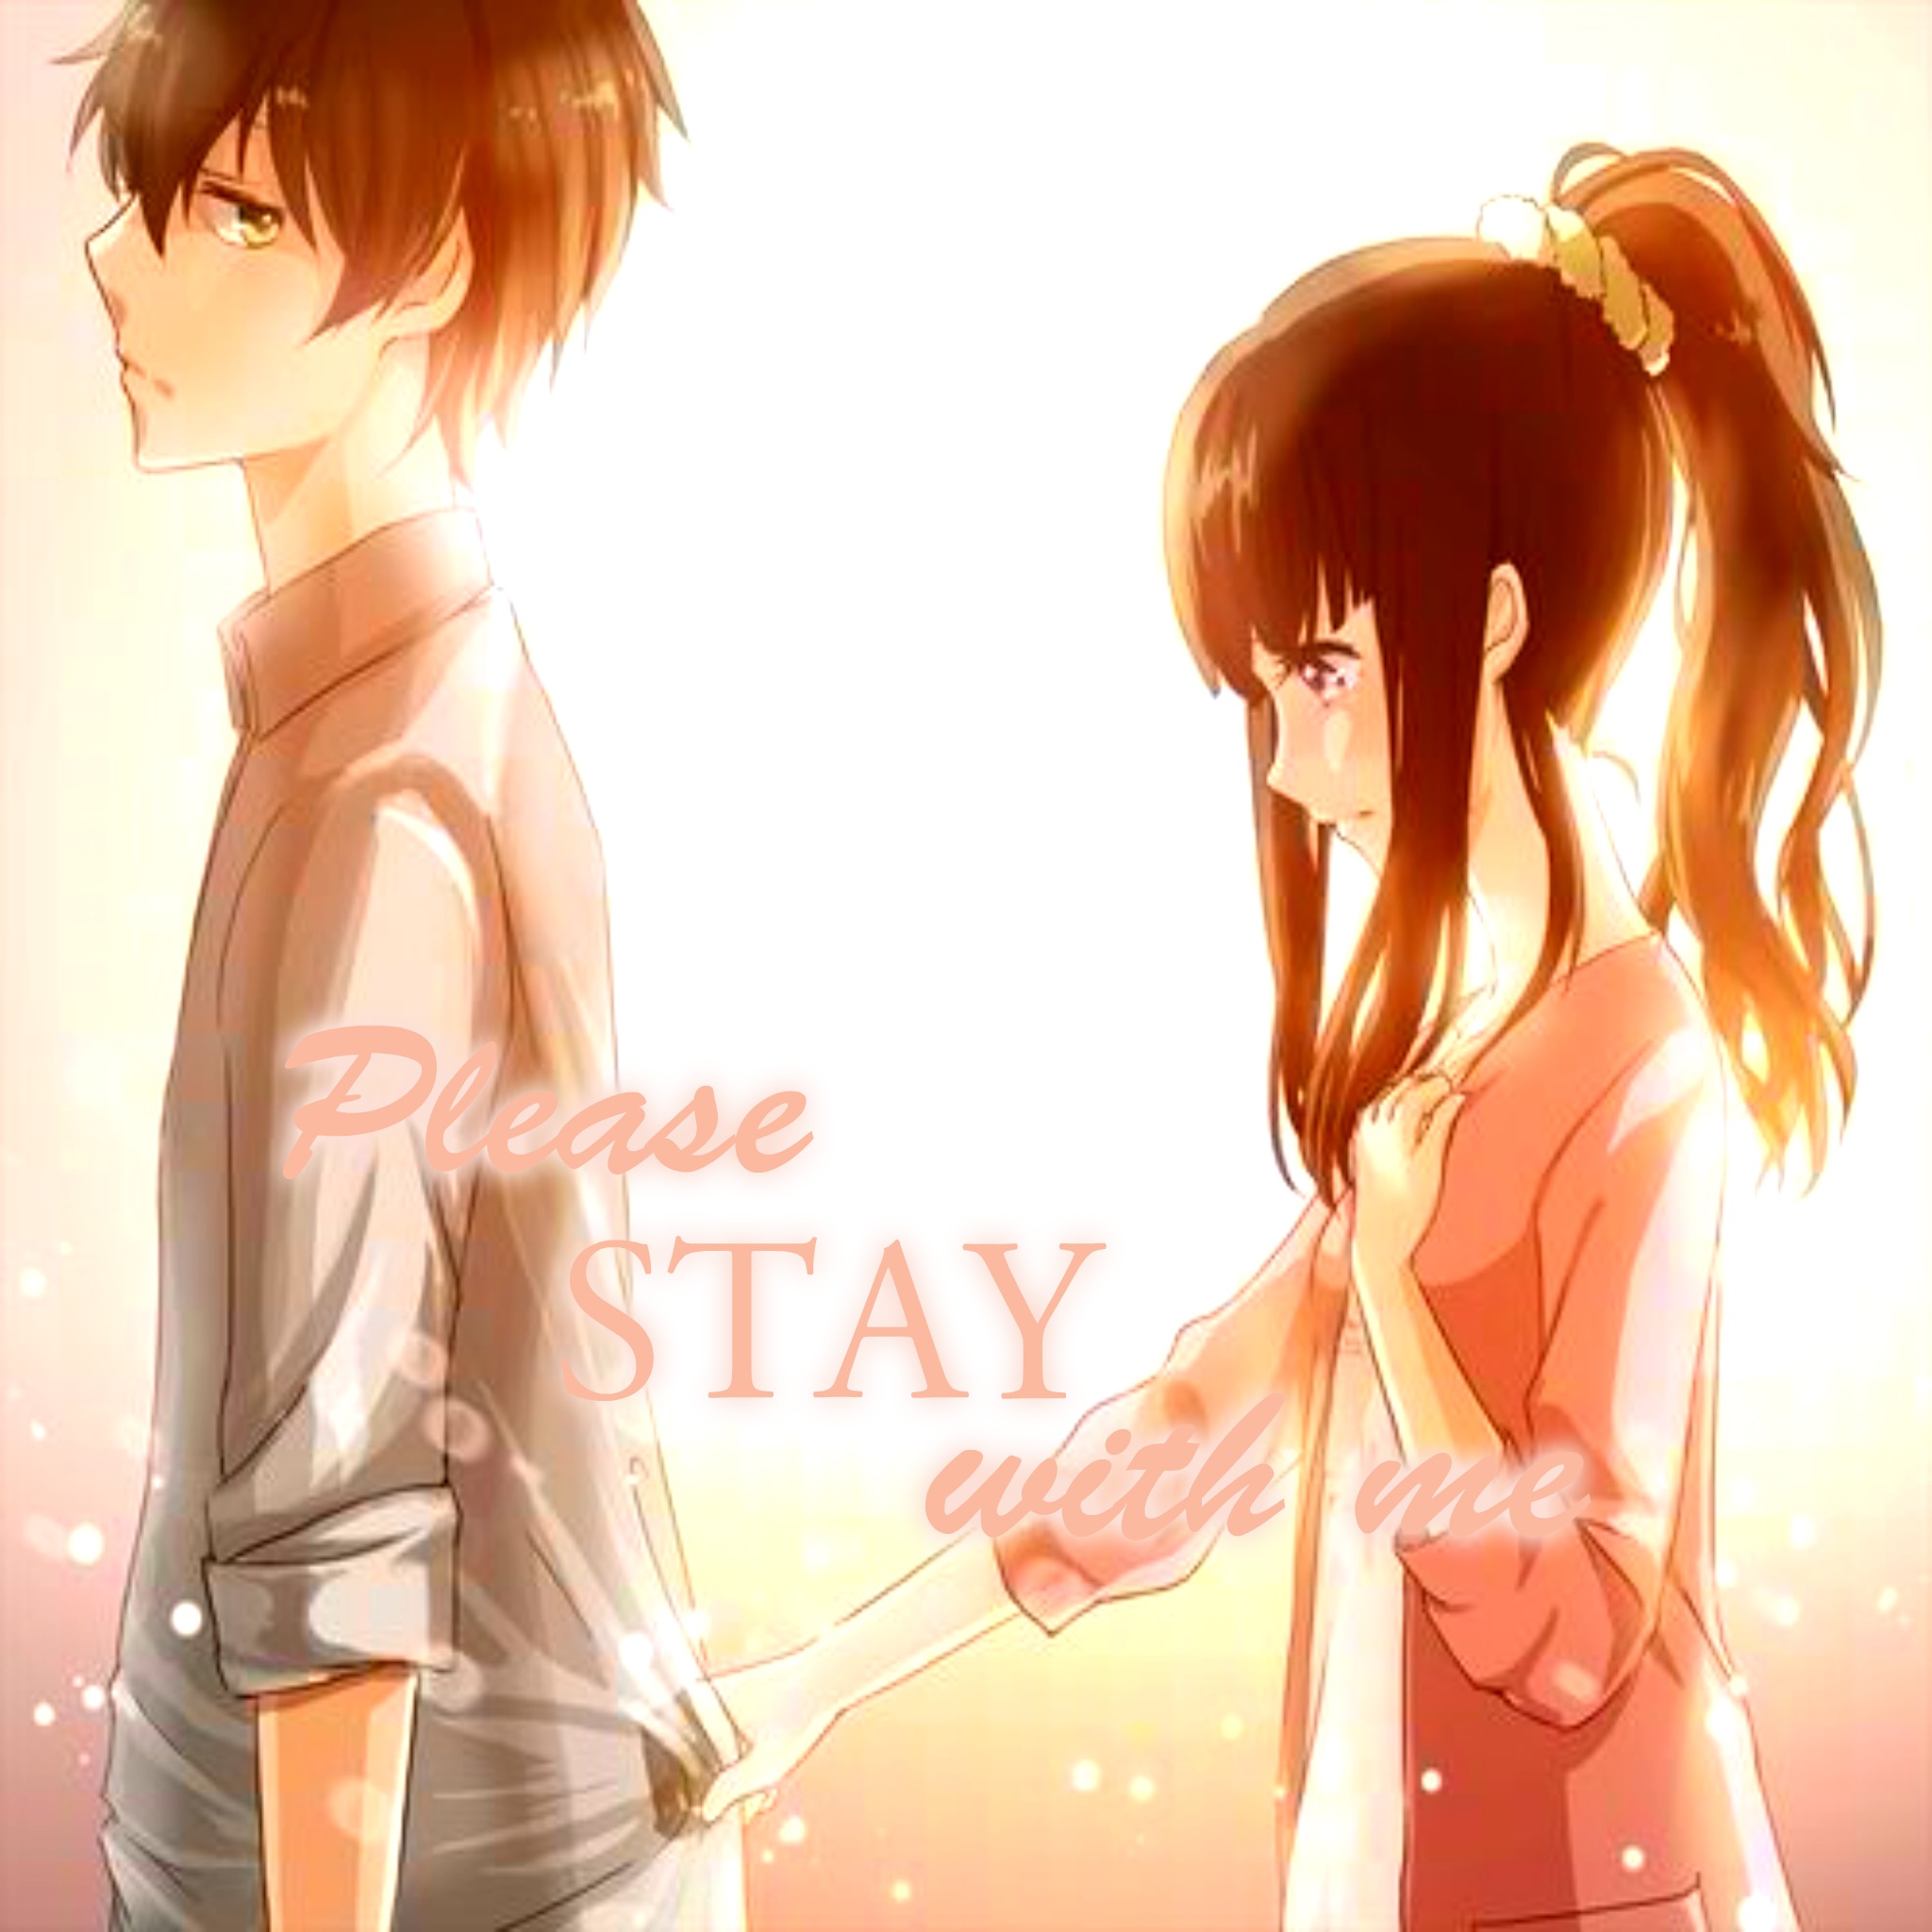 Please stay with me...